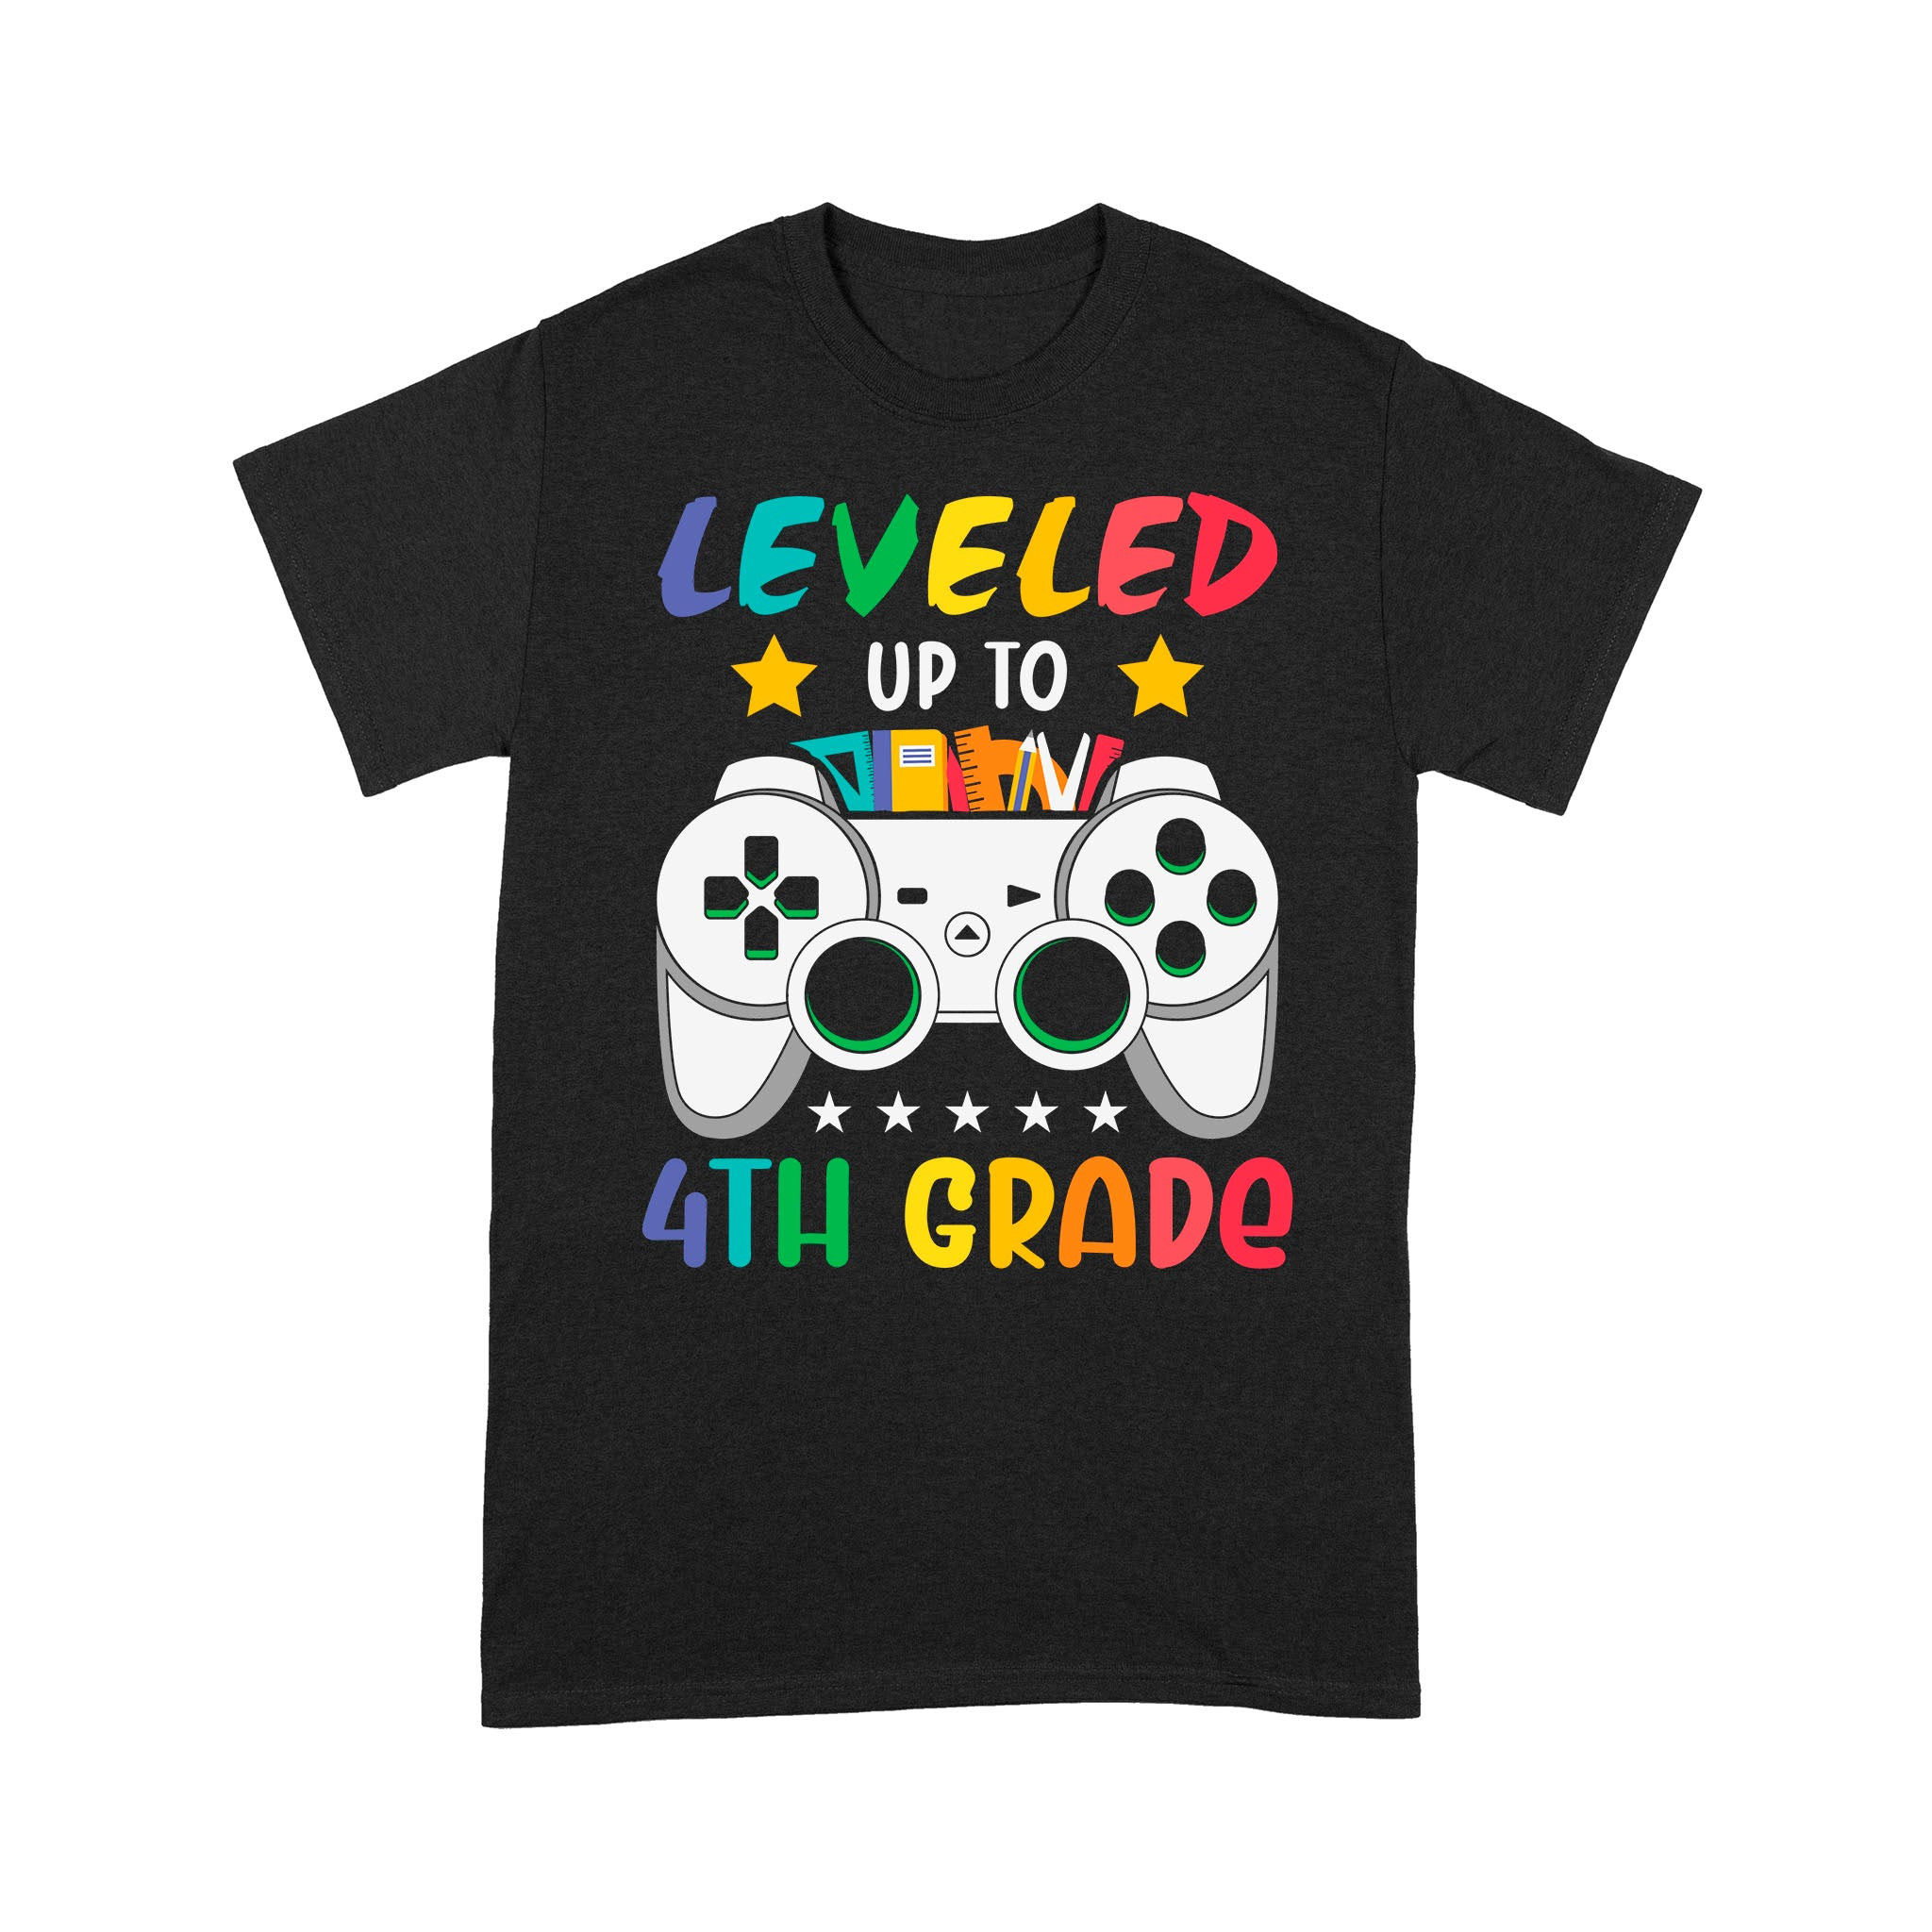 Standard T-Shirt Leveled Up To 4th Grade